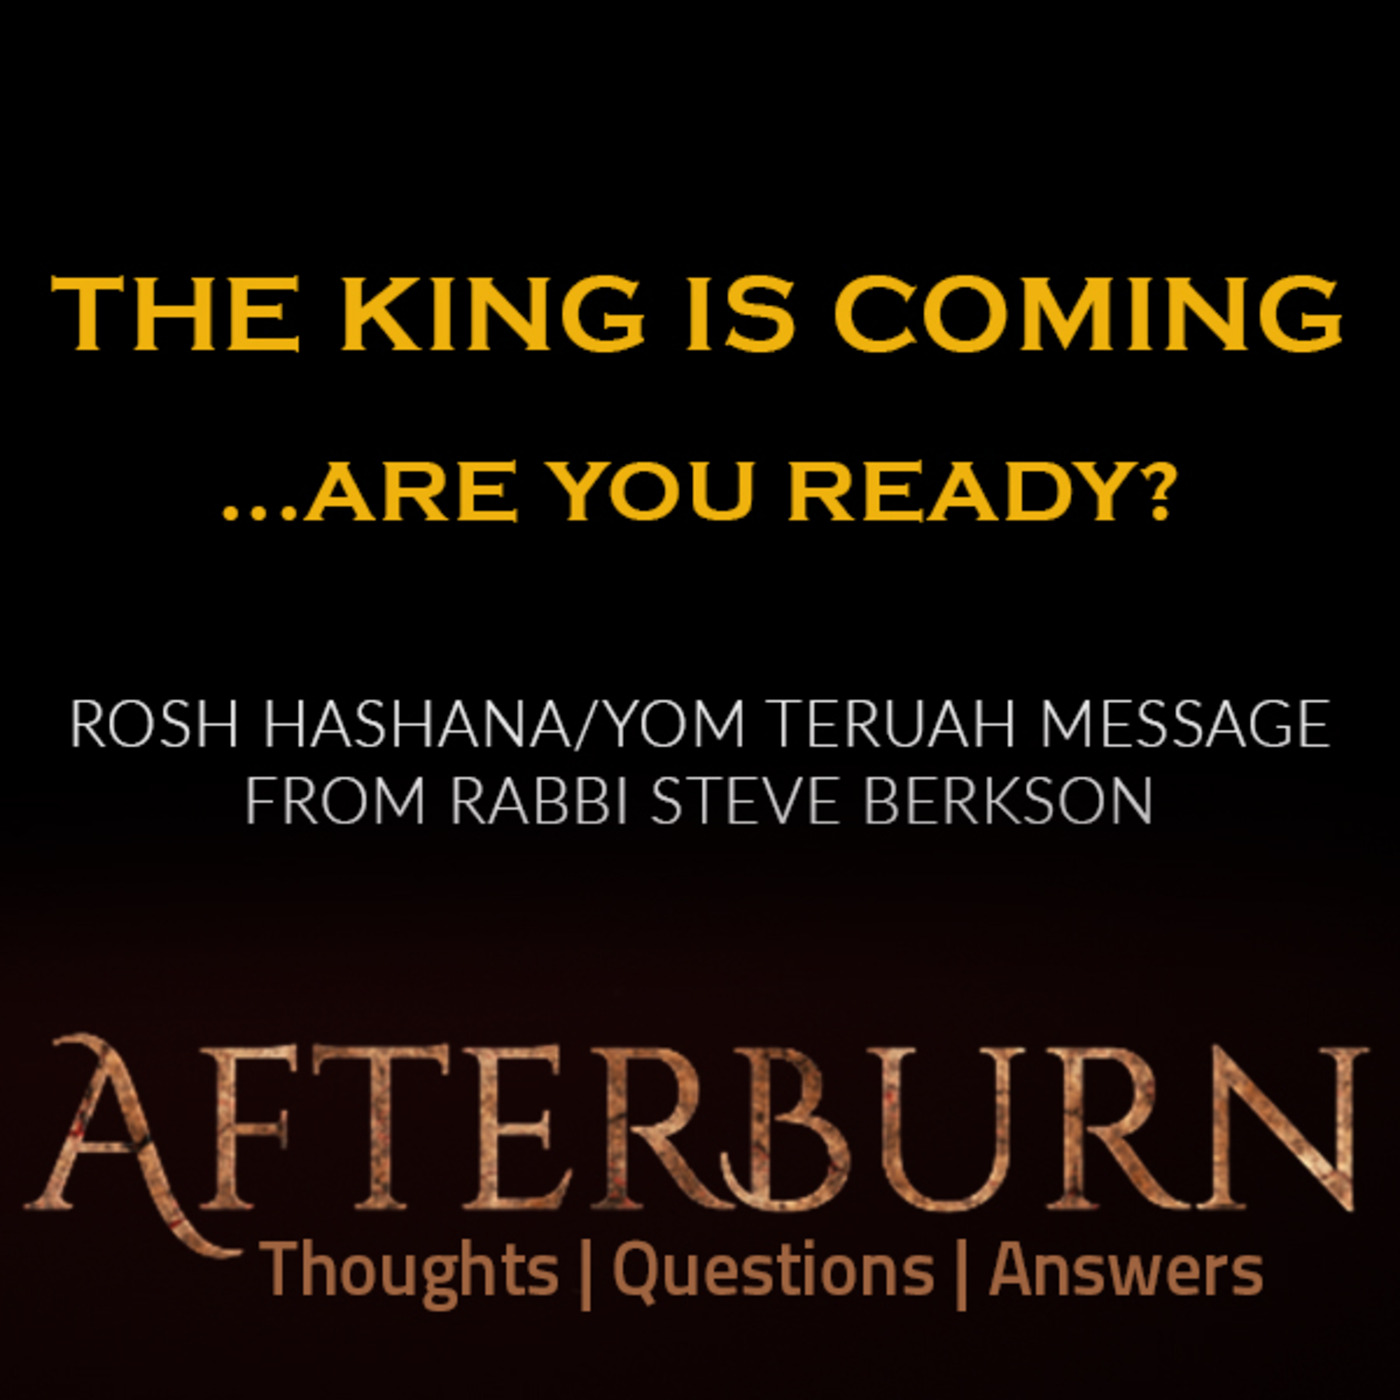 Episode 784: Afterburn | The King is Coming…Are You Ready? | Rosh Hashana/Yom Teruah Message